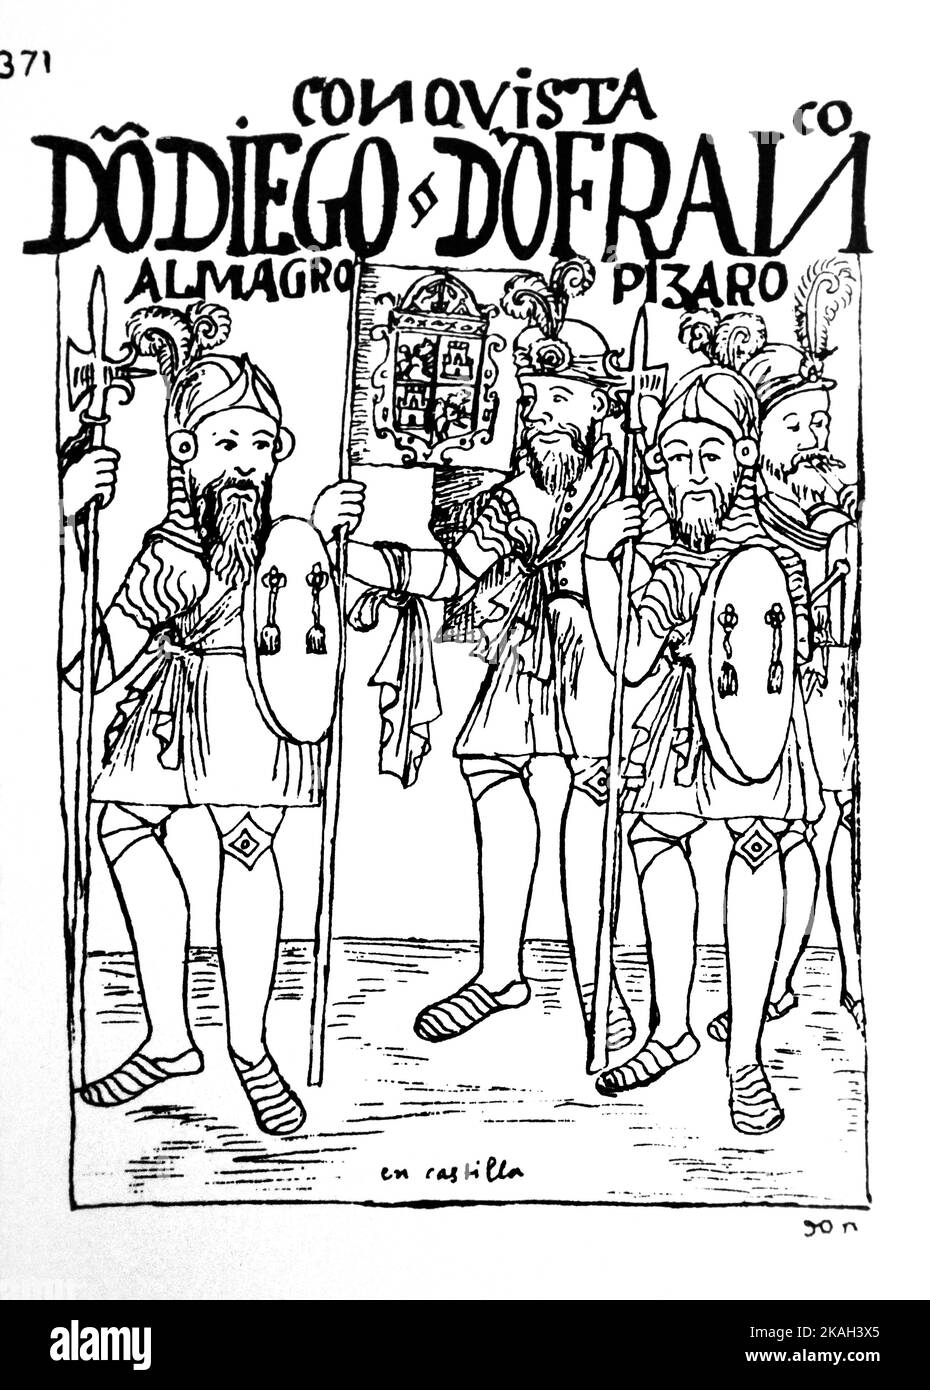 371.The Conquistadores Don Diego de Almagro and Don Francisco Pizarro.by Felipe Guamán Poma de Ayala (1535- 1616).Guamán Poma tells the story how spain built the most extensive colonial empire in the 'New World'' and conquest from an Andean perspective,in particular the ill-treatment of the natives of the Andes by the Spaniards,called the Nueva corónica y buen gobierno. Stock Photo